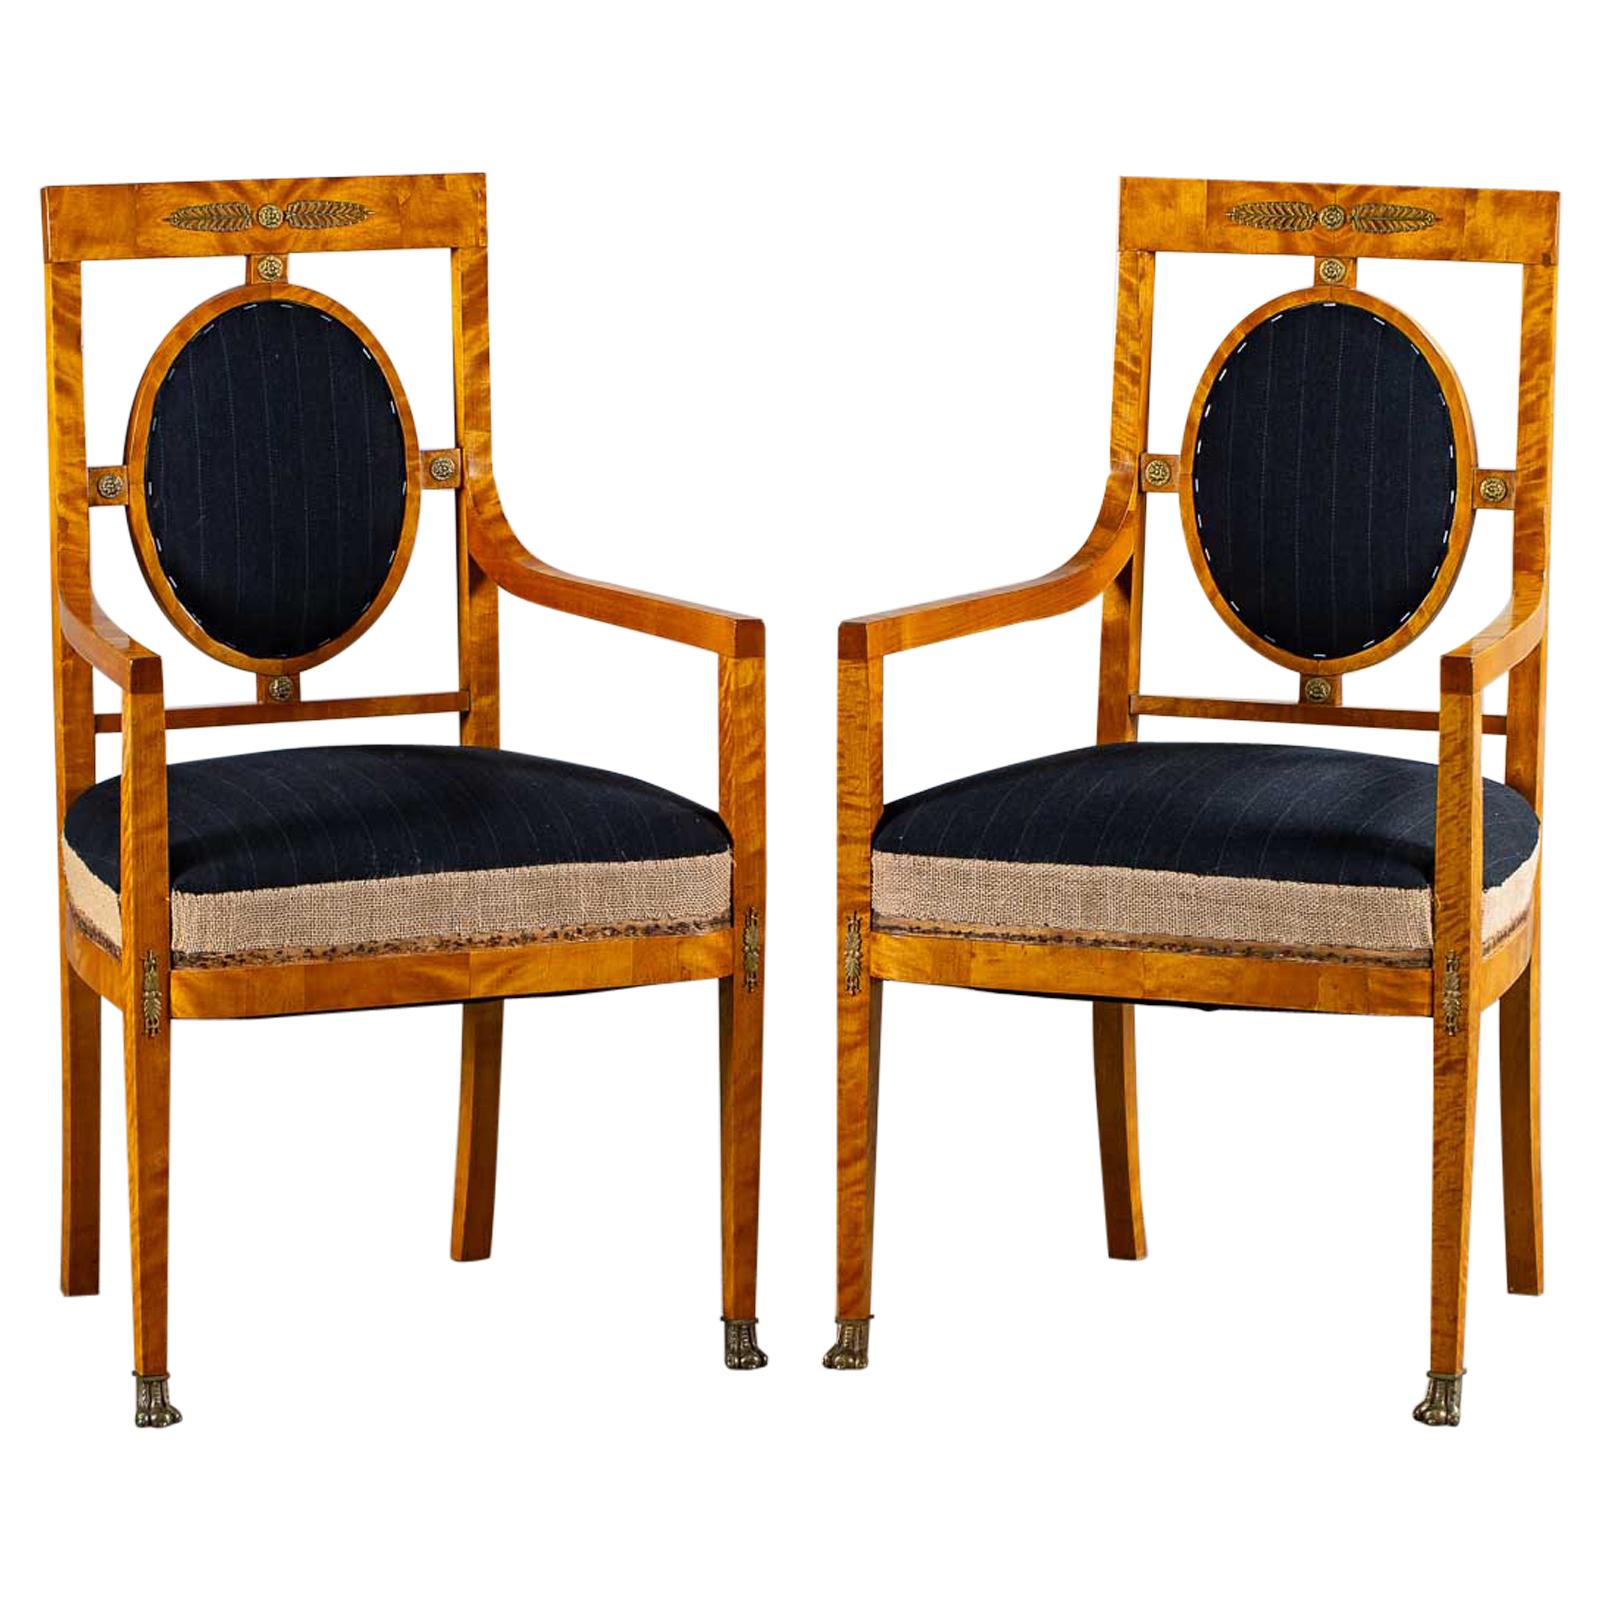 Pair of Vintage French Empire Revival Birchwood Chairs Original Upholstery